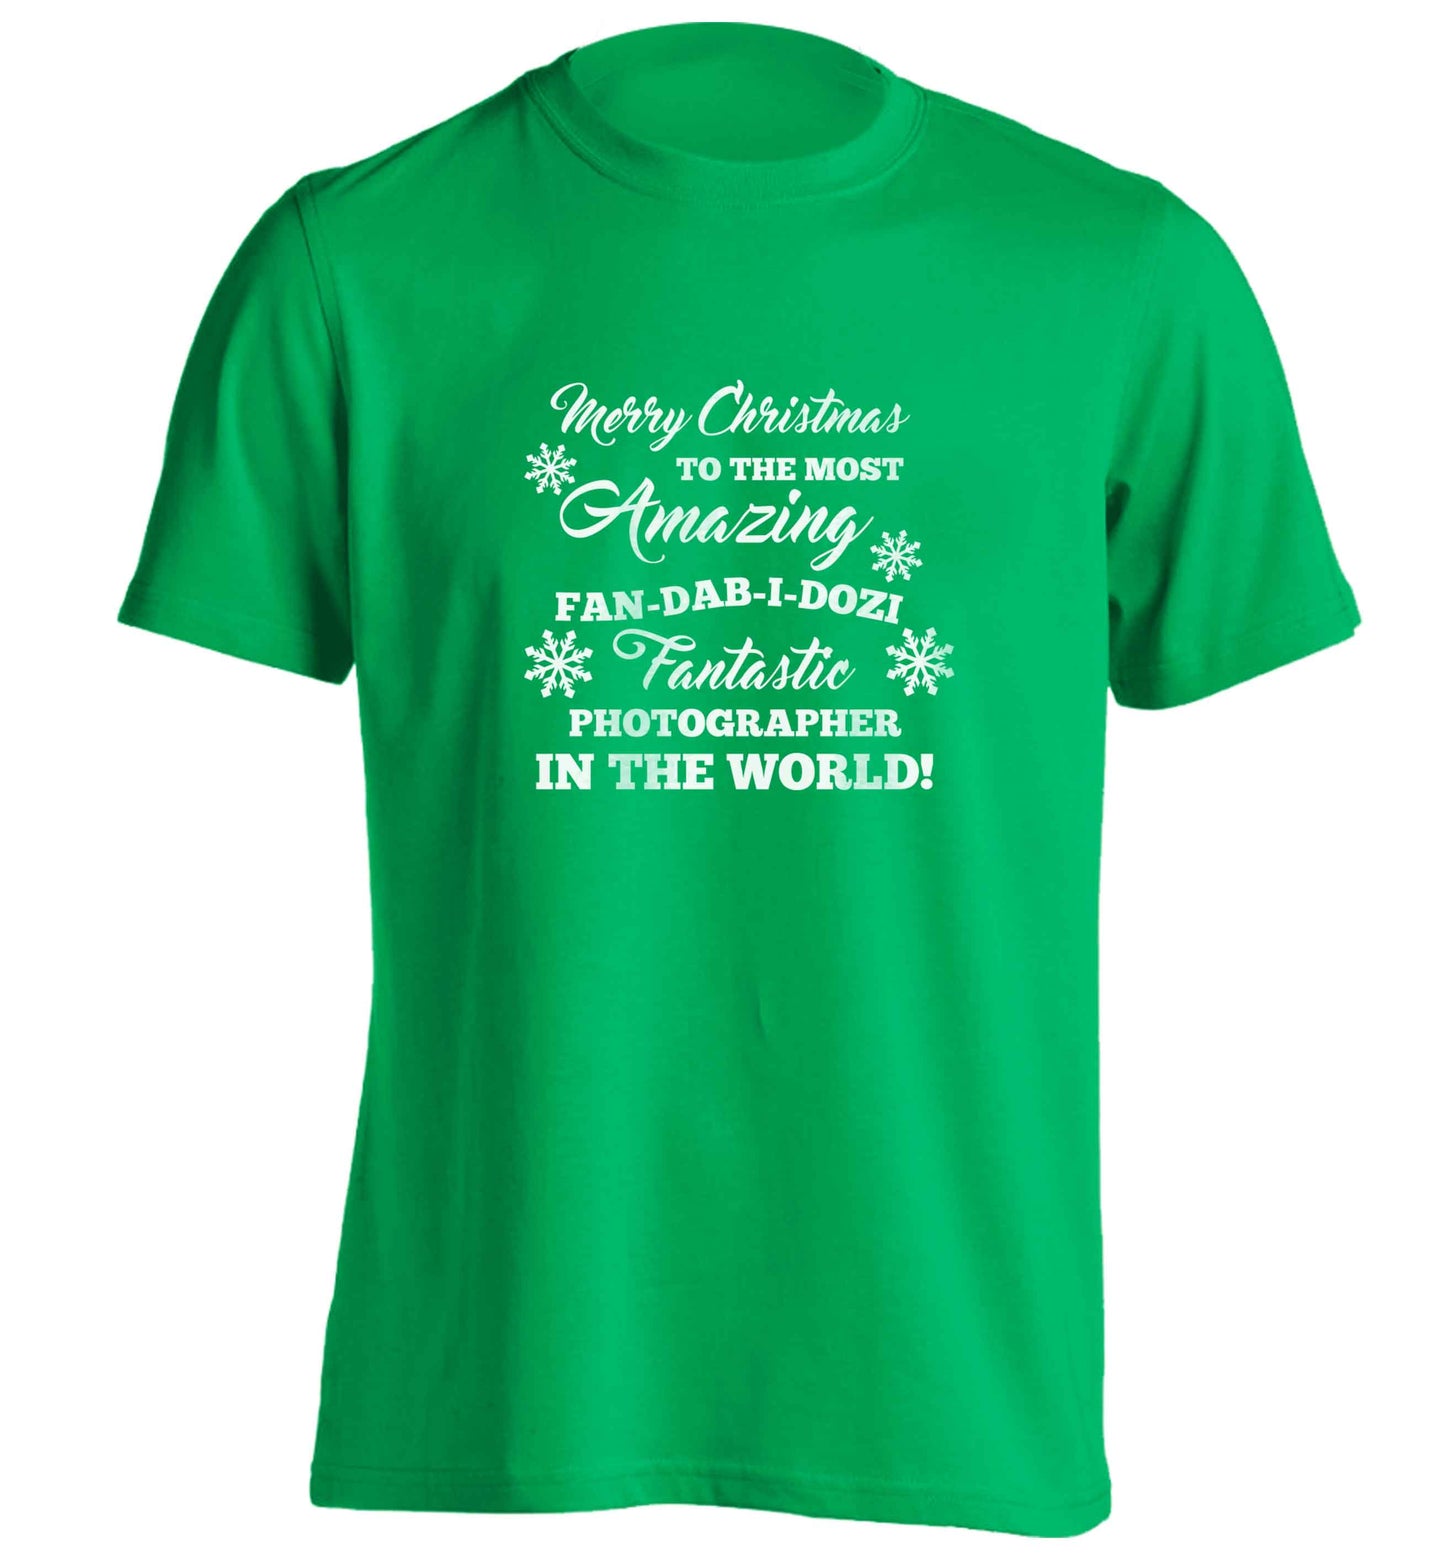 Merry Christmas to the most amazing fan-dab-i-dozi fantasic photographer in the world adults unisex green Tshirt 2XL